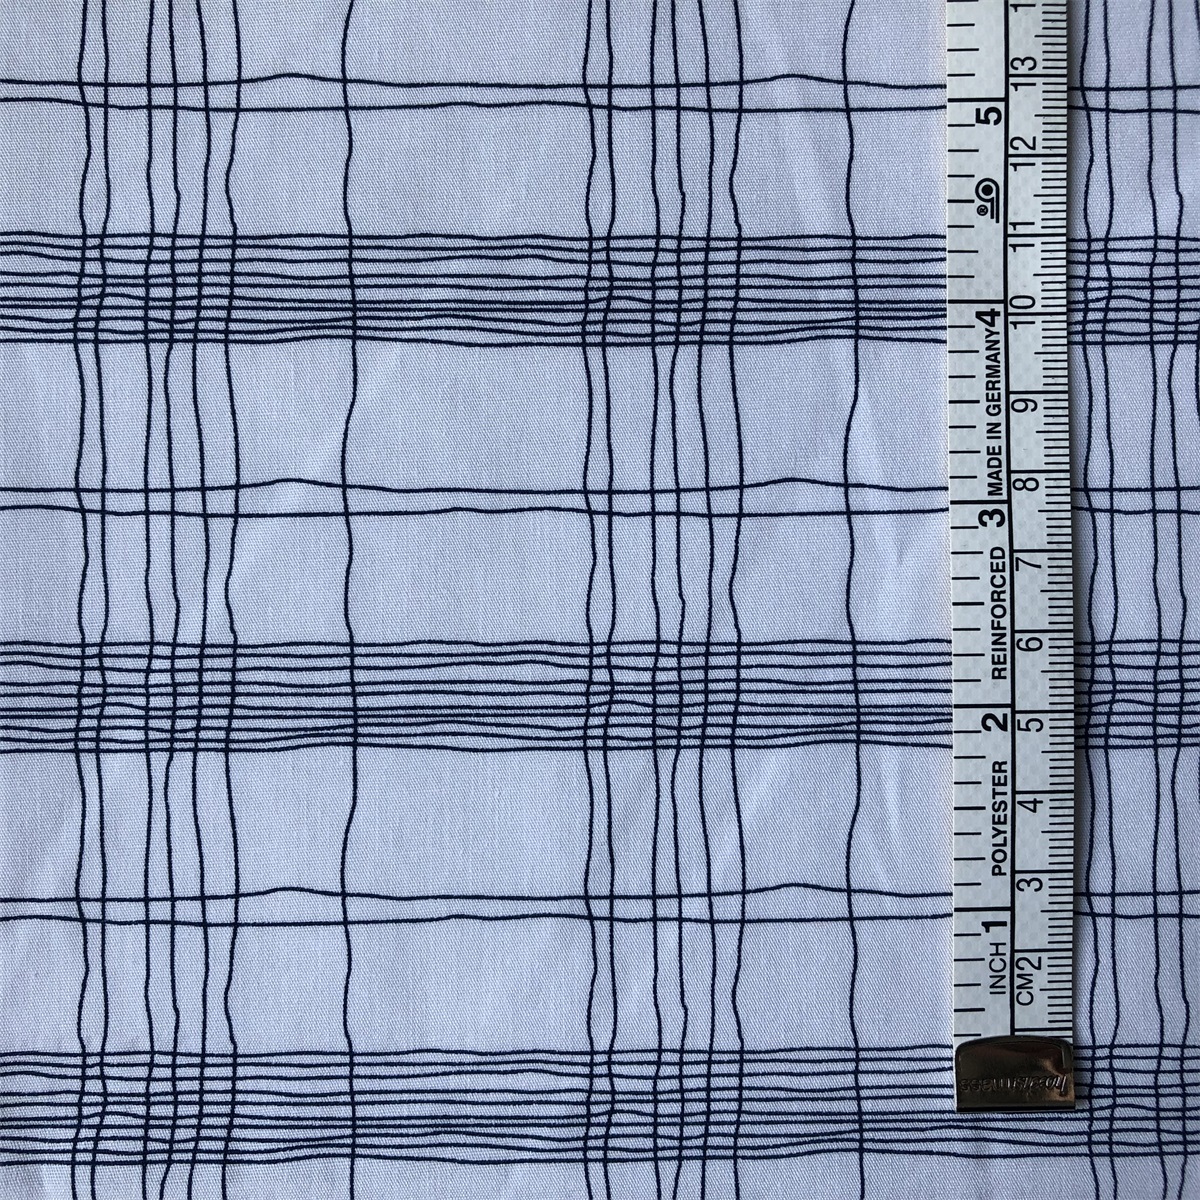 Sun-rising Textile Cotton fabric for men's casual shirts 100% cotton poplin printed shirts woven fabric soft touch